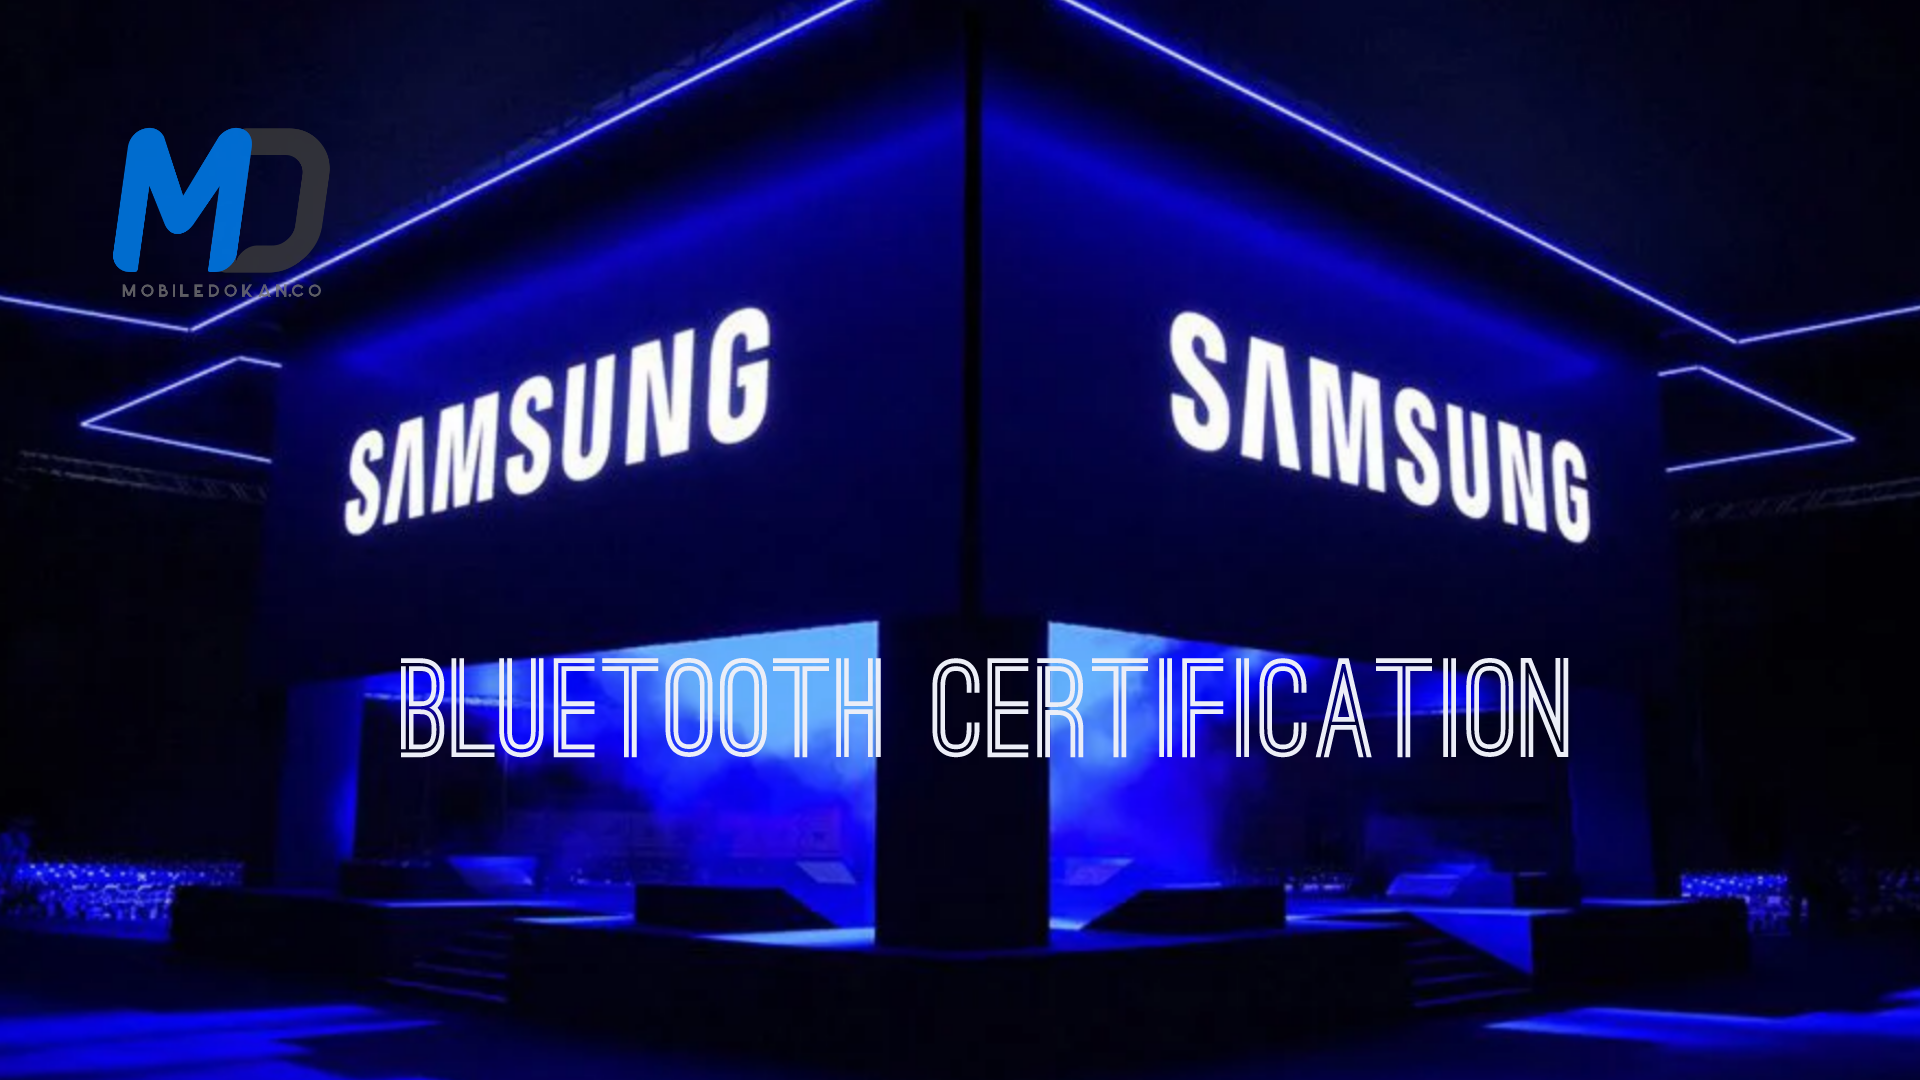 Samsung Galaxy M22 receives Bluetooth certification, ahead of launch soon